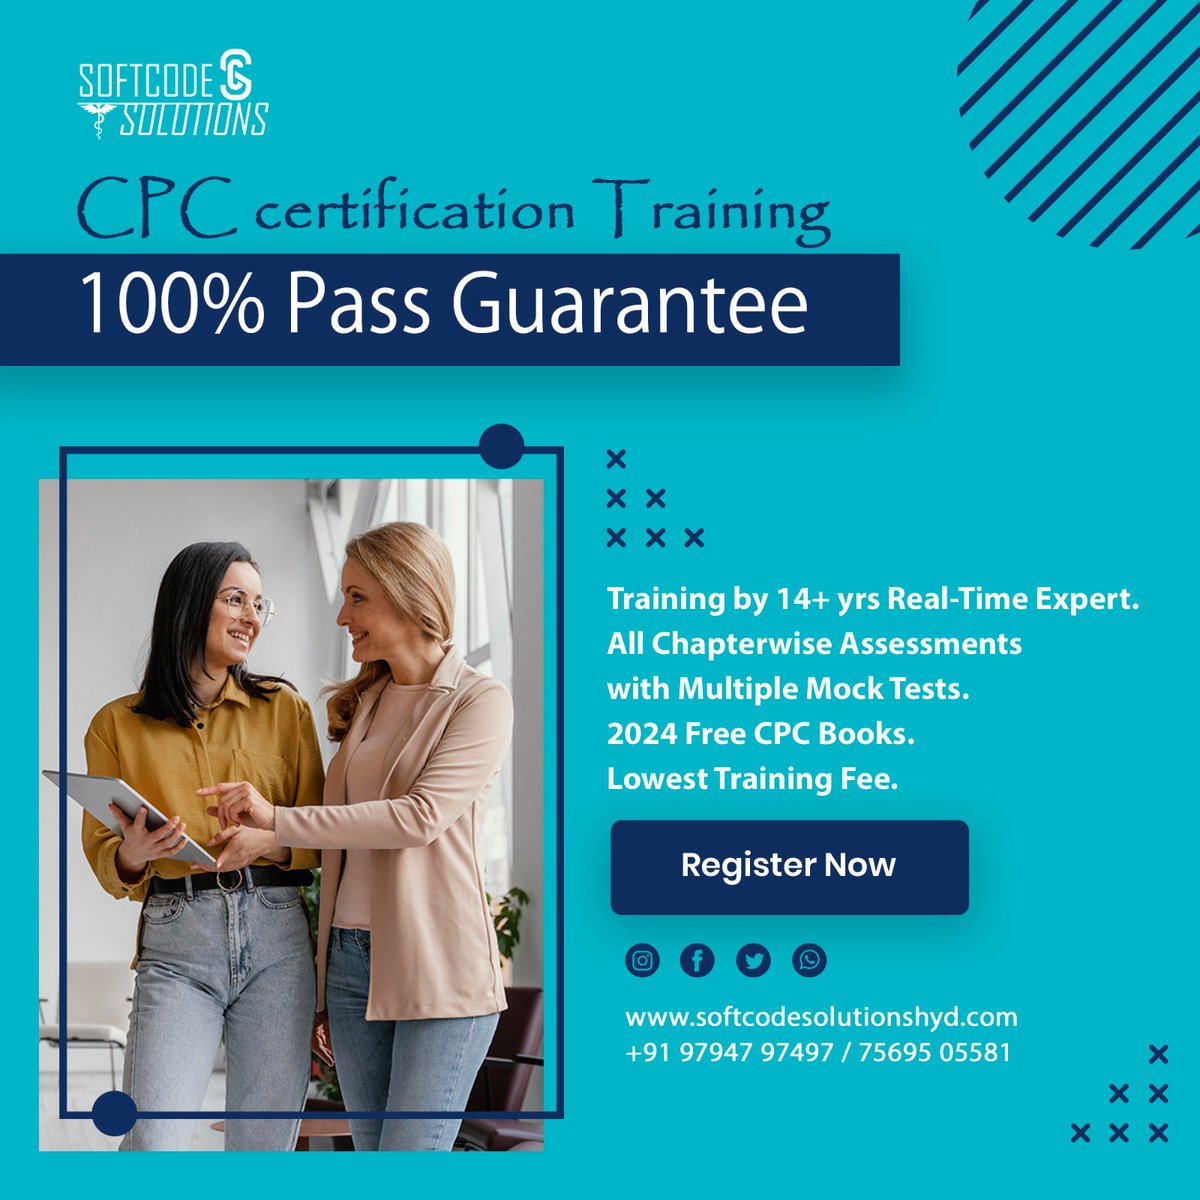 🌟 Ready to conquer your CPC certification? Our program has you covered! Here's why you should join us:
🌐 softcodesolutionshyd.com
📞 +91 97947 97497 / +91 75695 05581
#CPCCertification #TrainingProgram #CareerSuccess #PassGuarantee #SuccessAwaits  #medicalcodingeducation